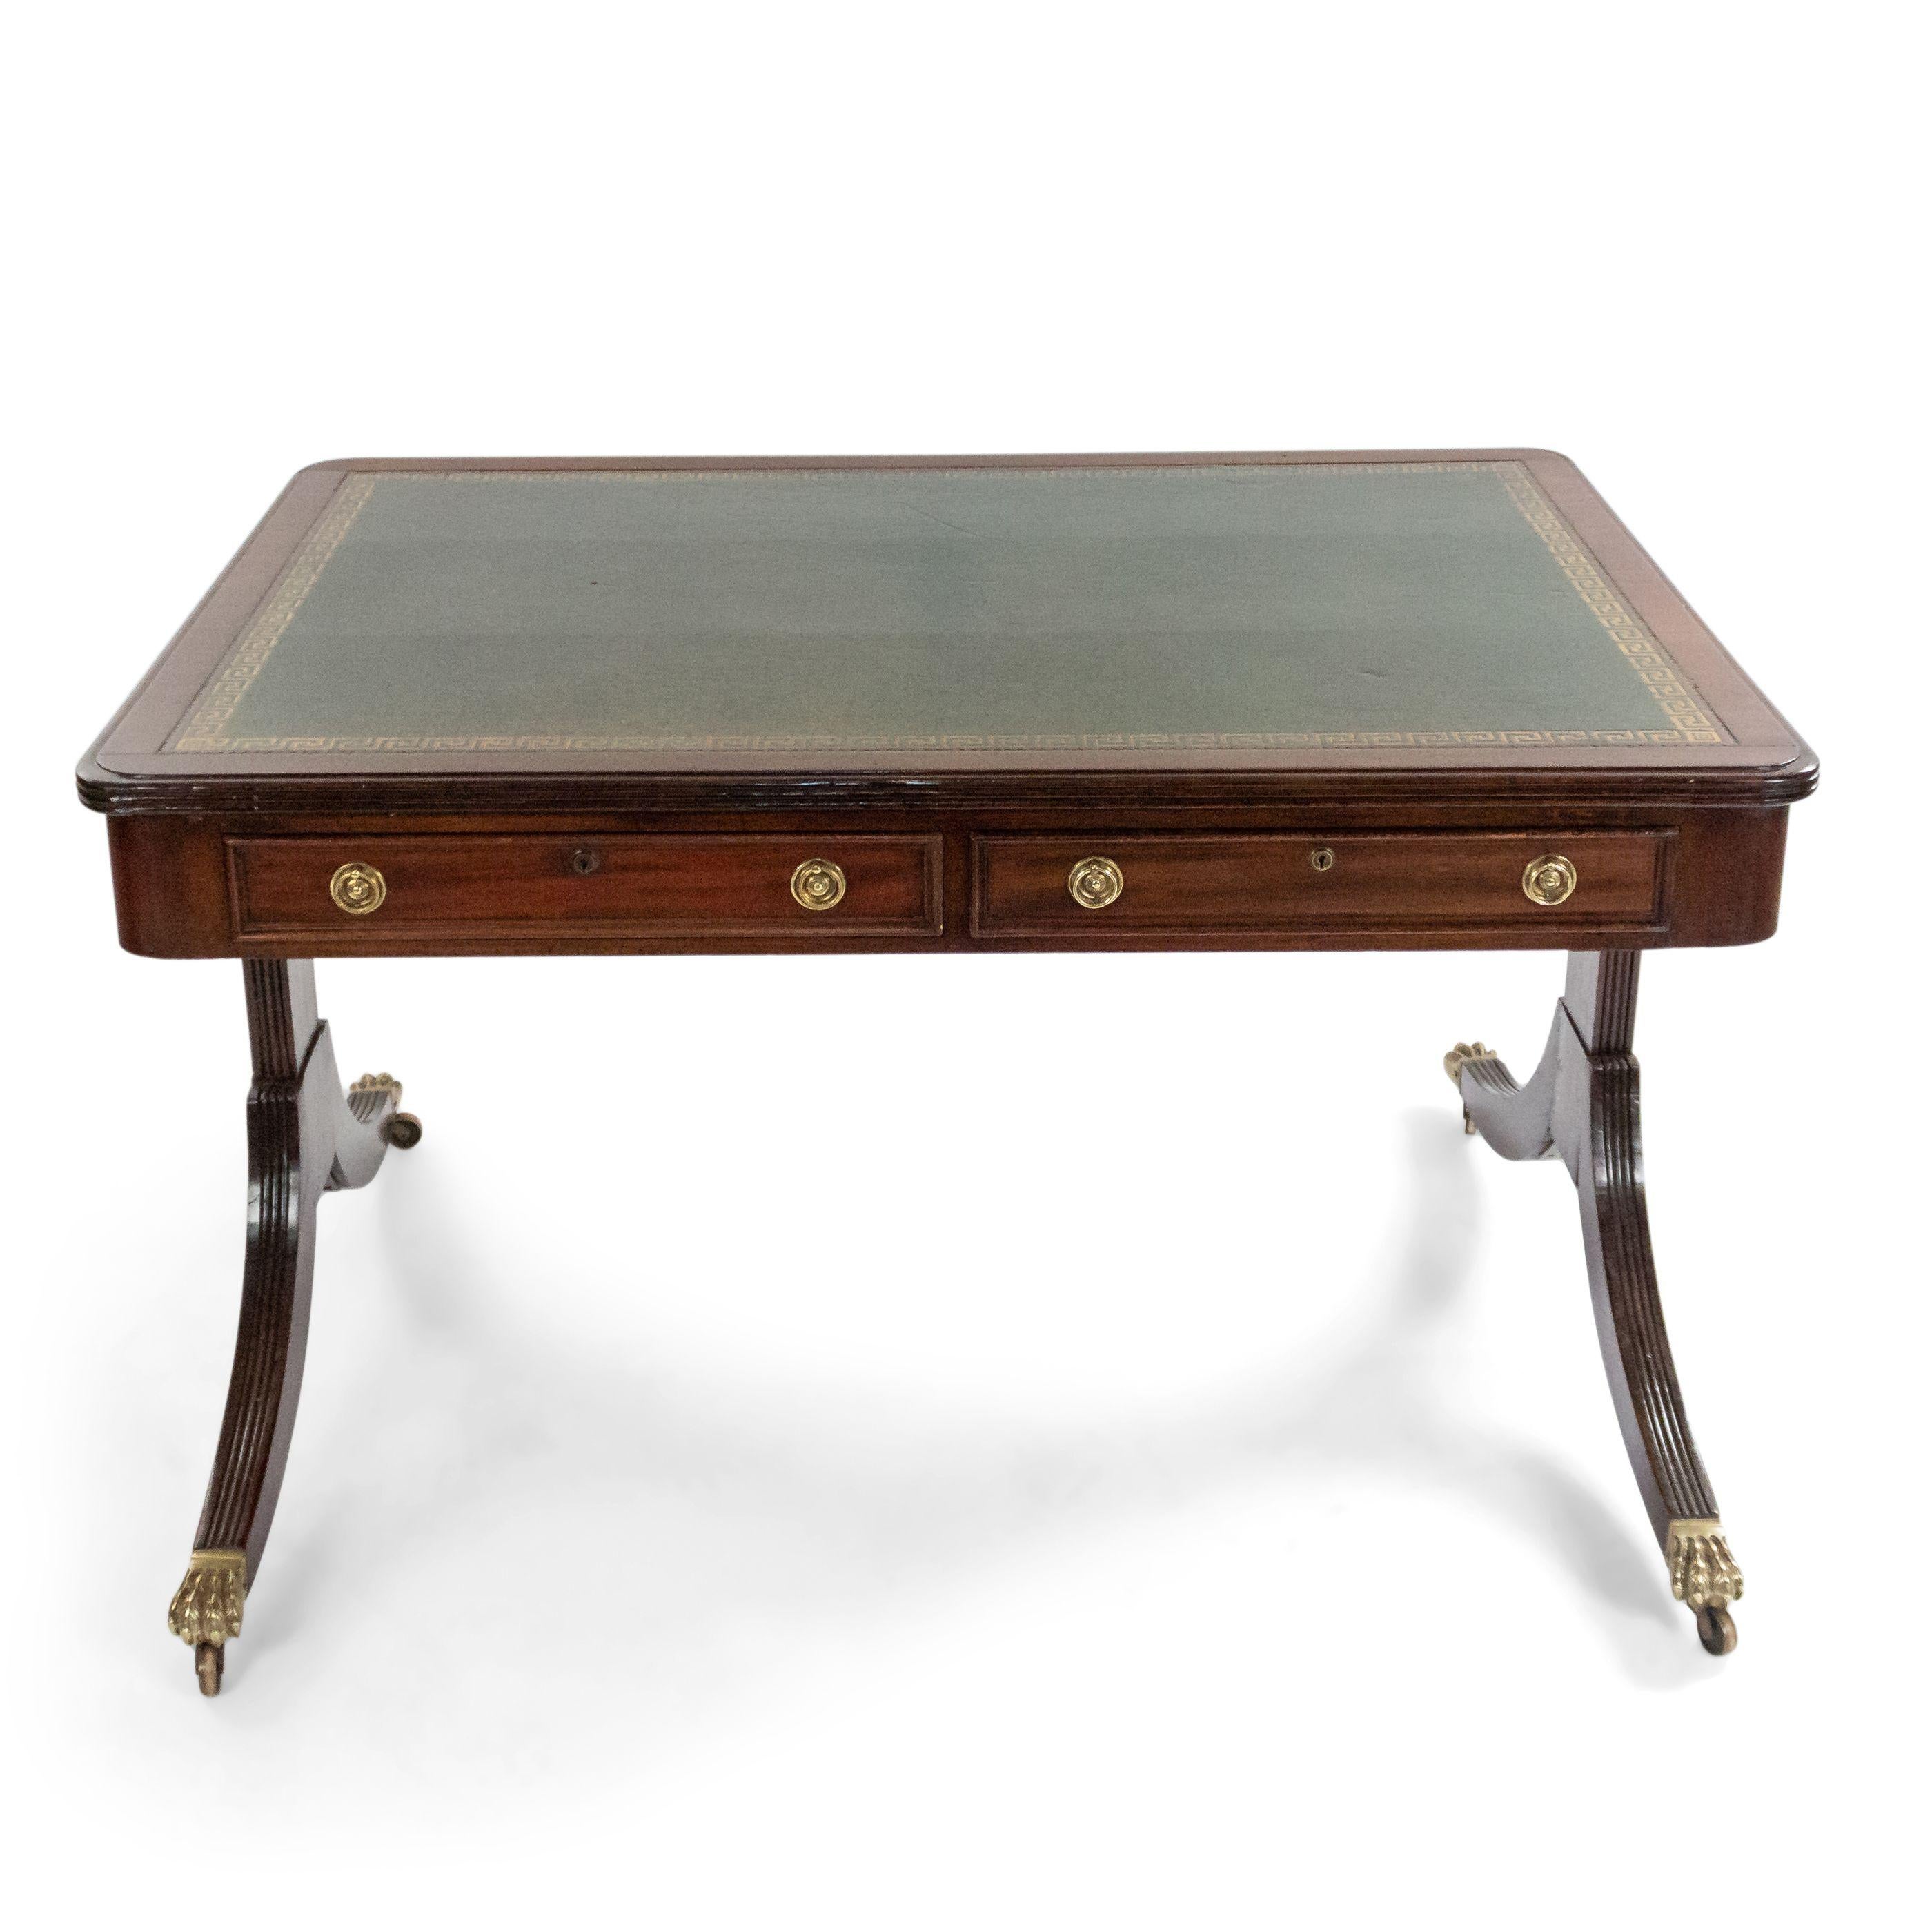 19th century English Regency style mahogany writing table (desk) with inset green leather top above 2 frieze drawers to either side on trestle supports and splayed legs.